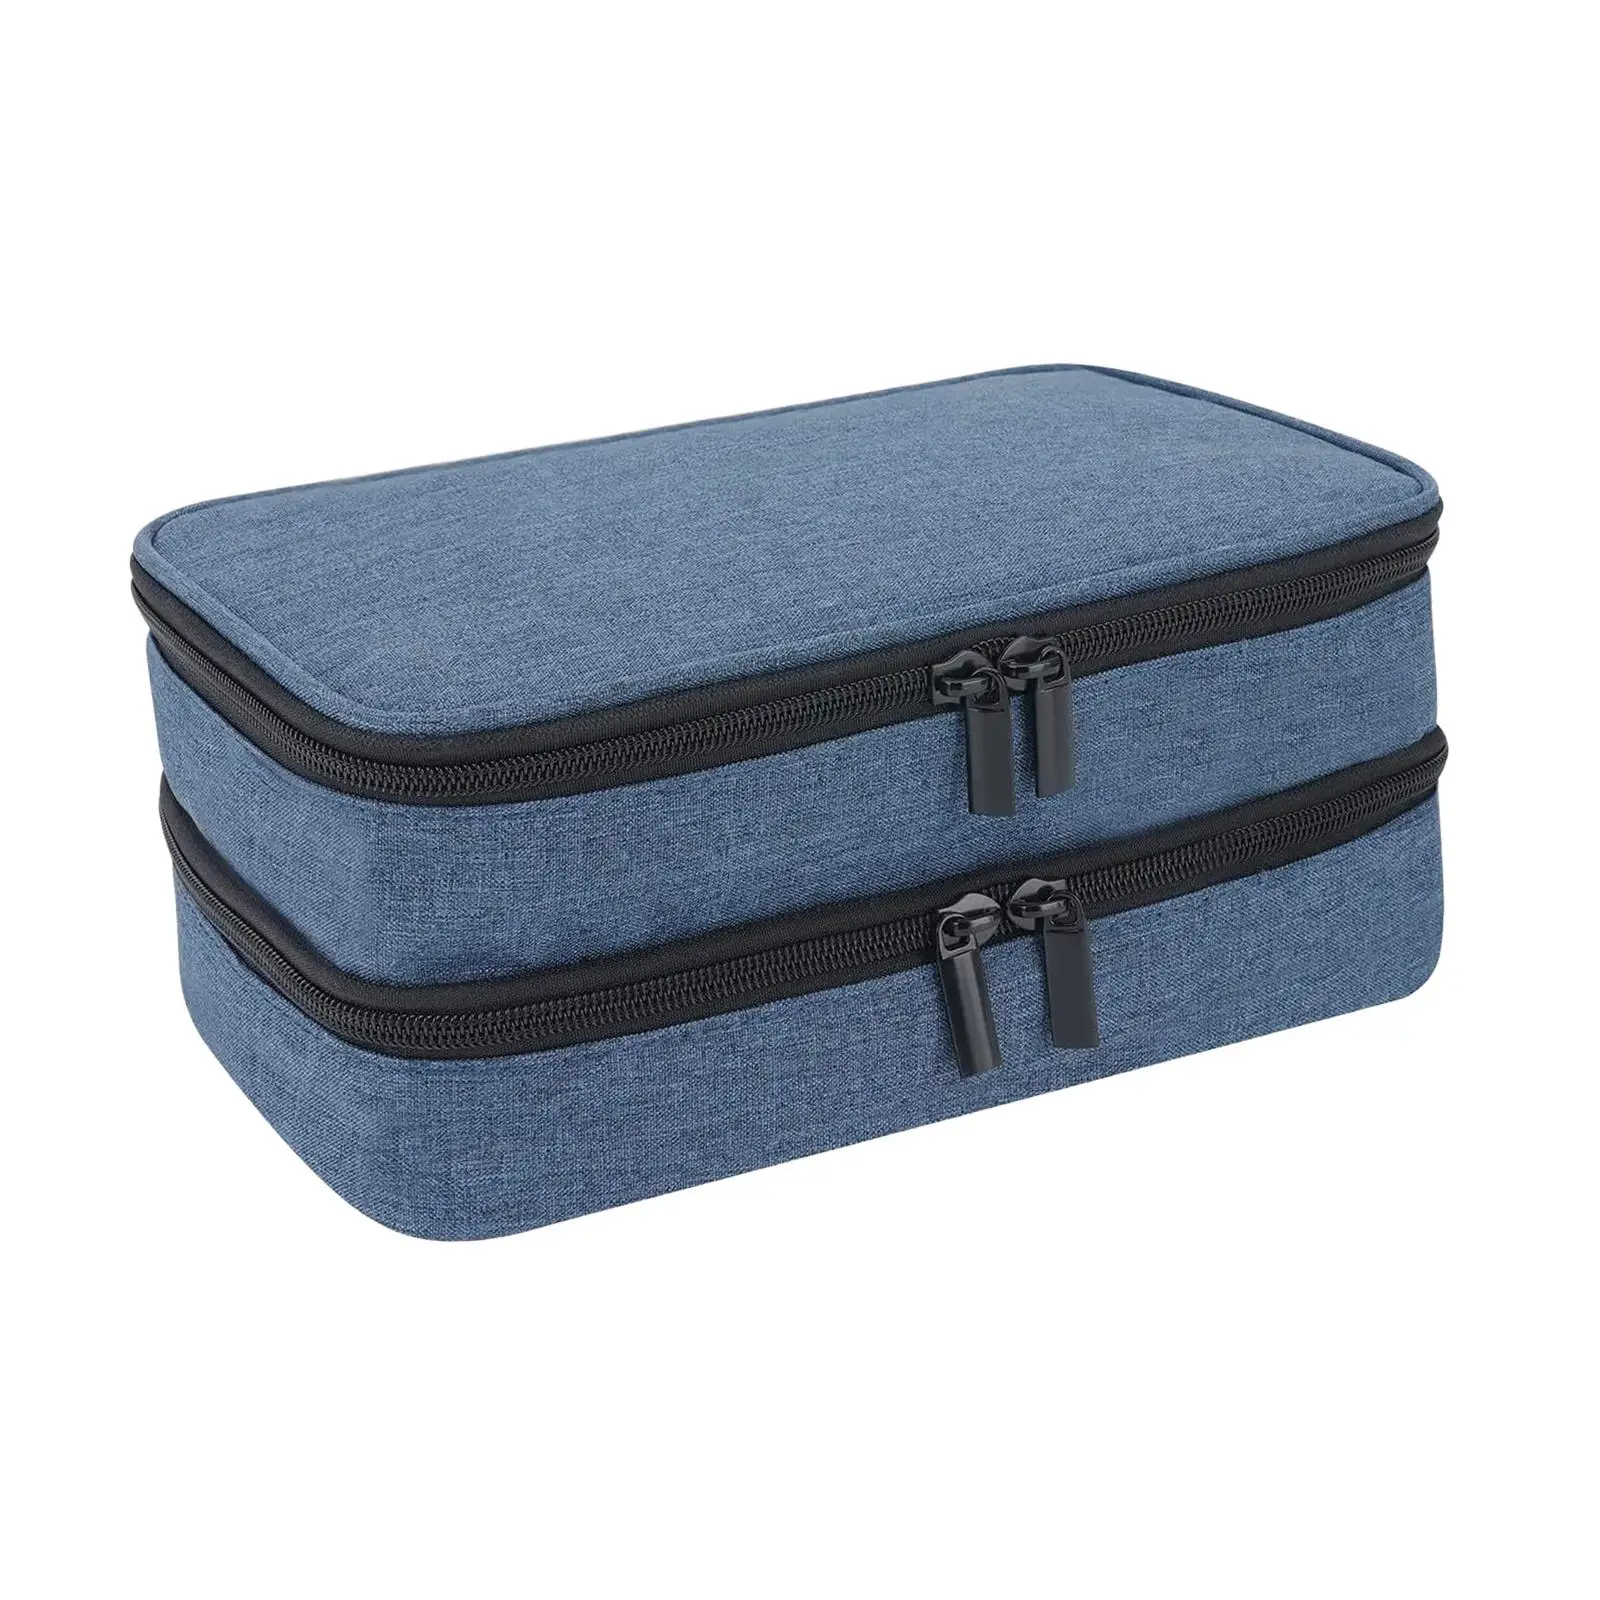 Cooler Travel Case 2 Small Detachable Zipper Pockets Keep Cool Small Isolated Pack Insulation Storage Bag for Ice Packs Supplies